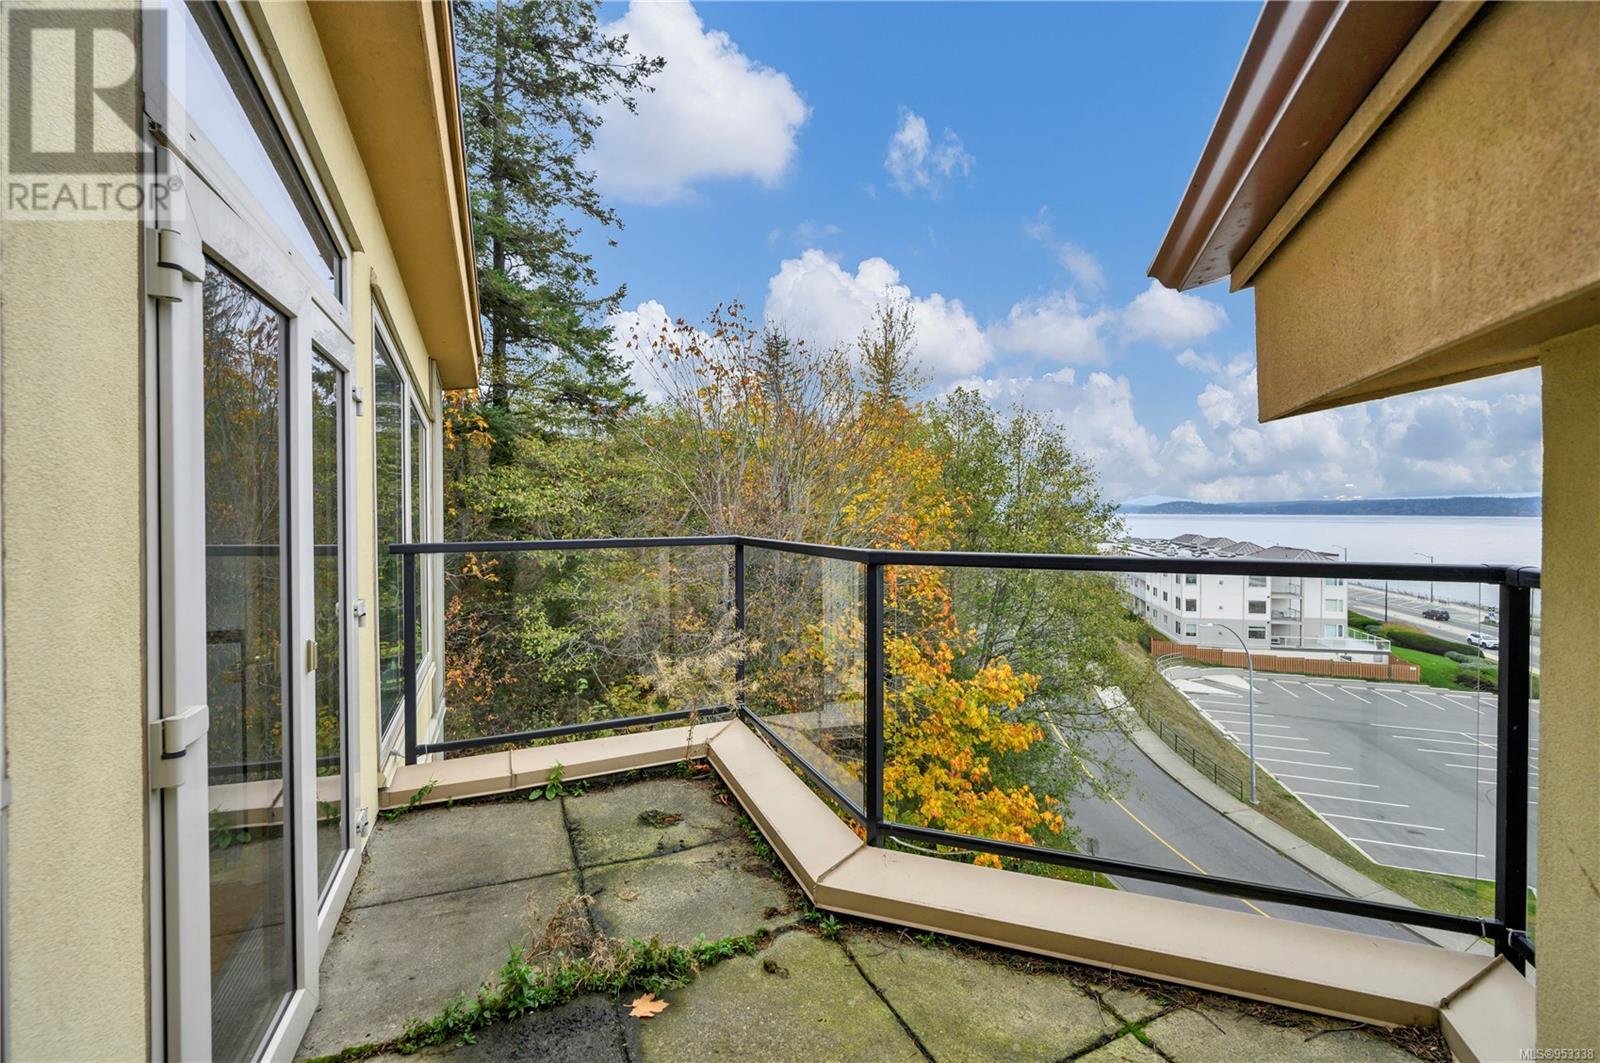 405 1392 Island Hwy S, Campbell River